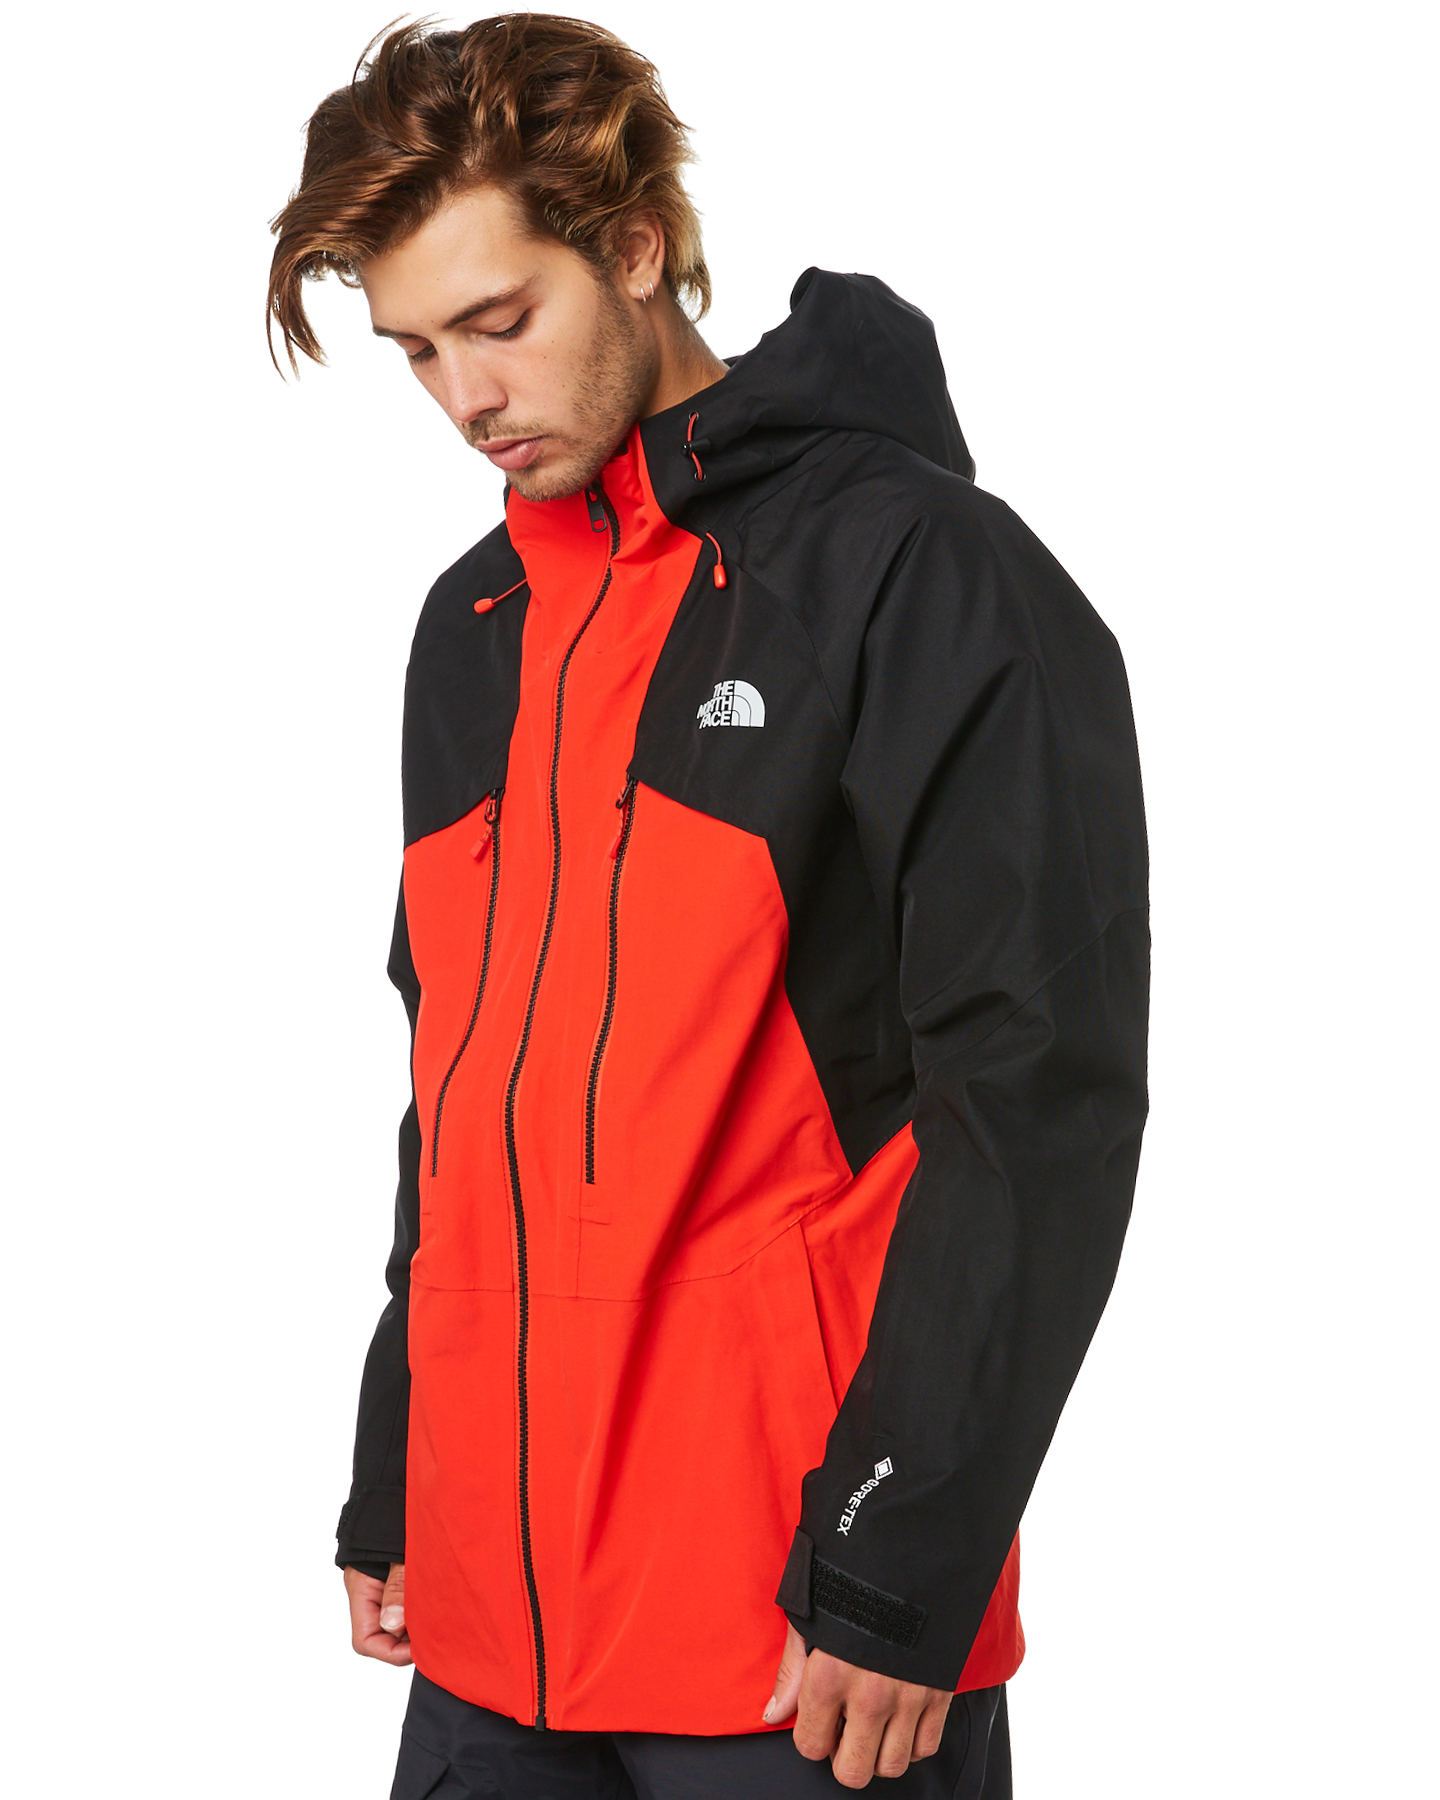 The North Face Mens Powederflo Gore-Tex Snow Jacket - Fiery Red Tnf